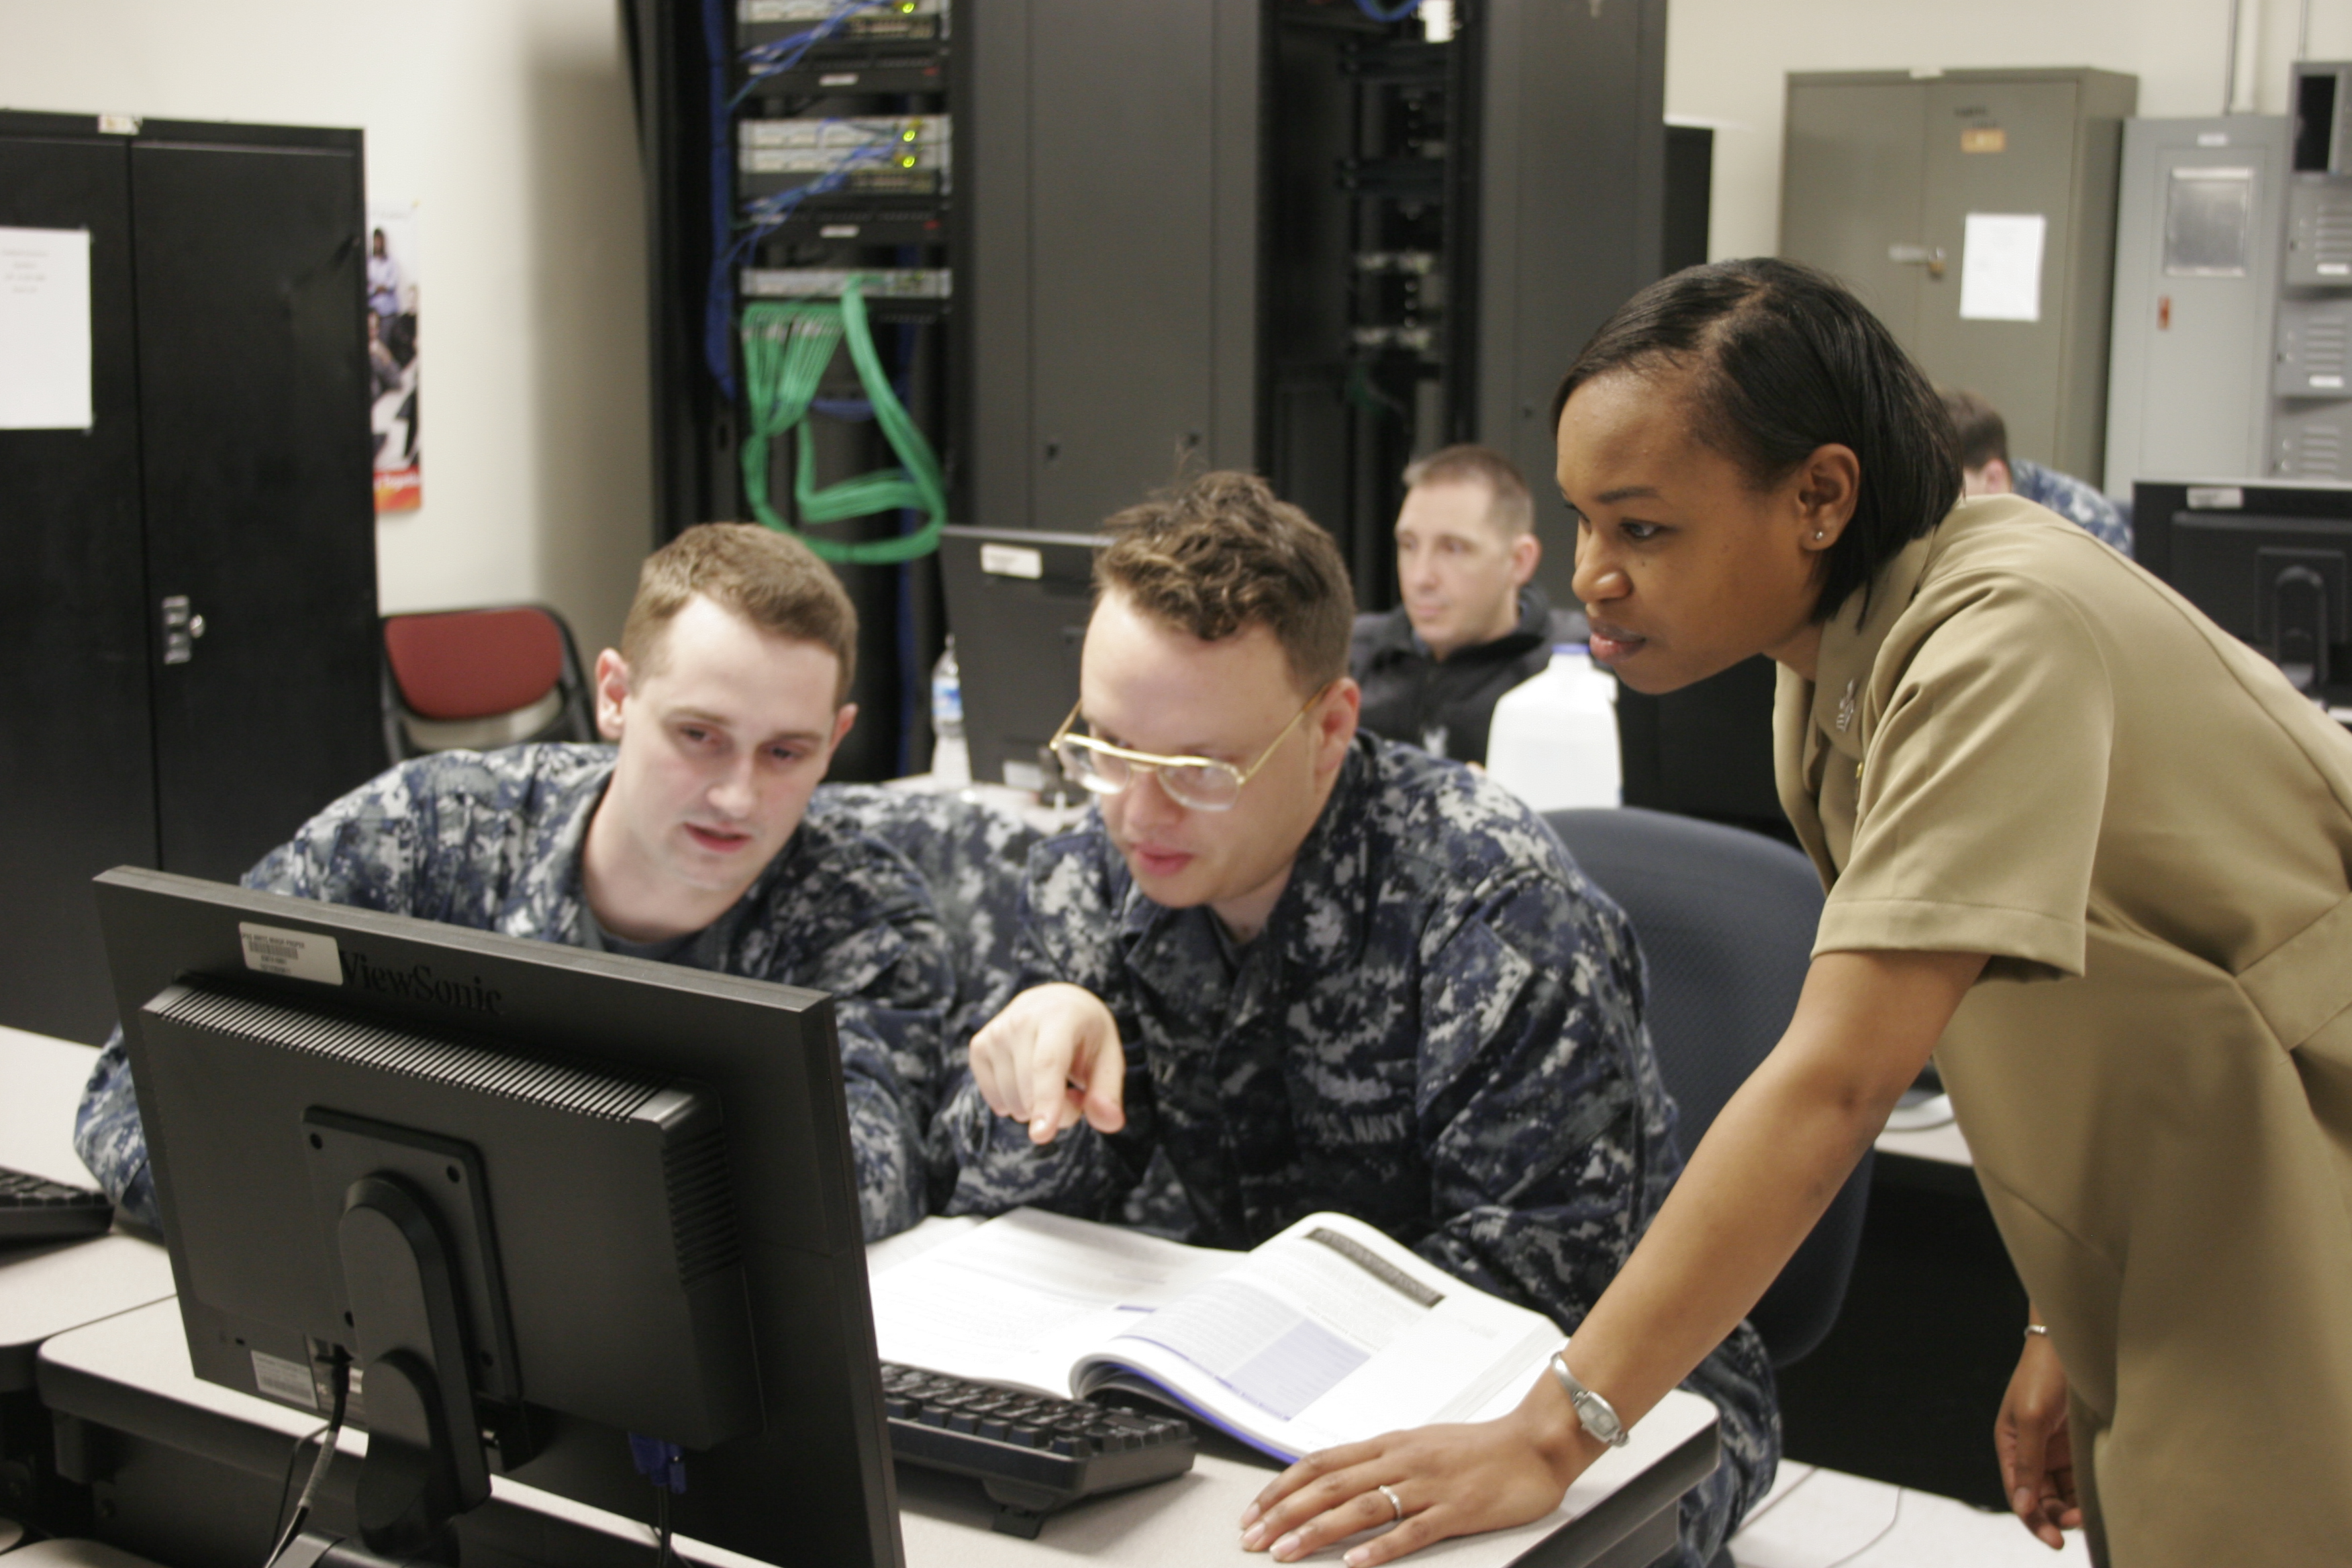 Petty Officer 1st Class Shanta McPherson, an IT "C" and "F" school instructor and course supervisor, teaches students at Information Warfare Training Command (IWTC) Virginia Beach. U.S. Navy photo by Petty Officer 1st Class Anabel Delgado-Gionet.